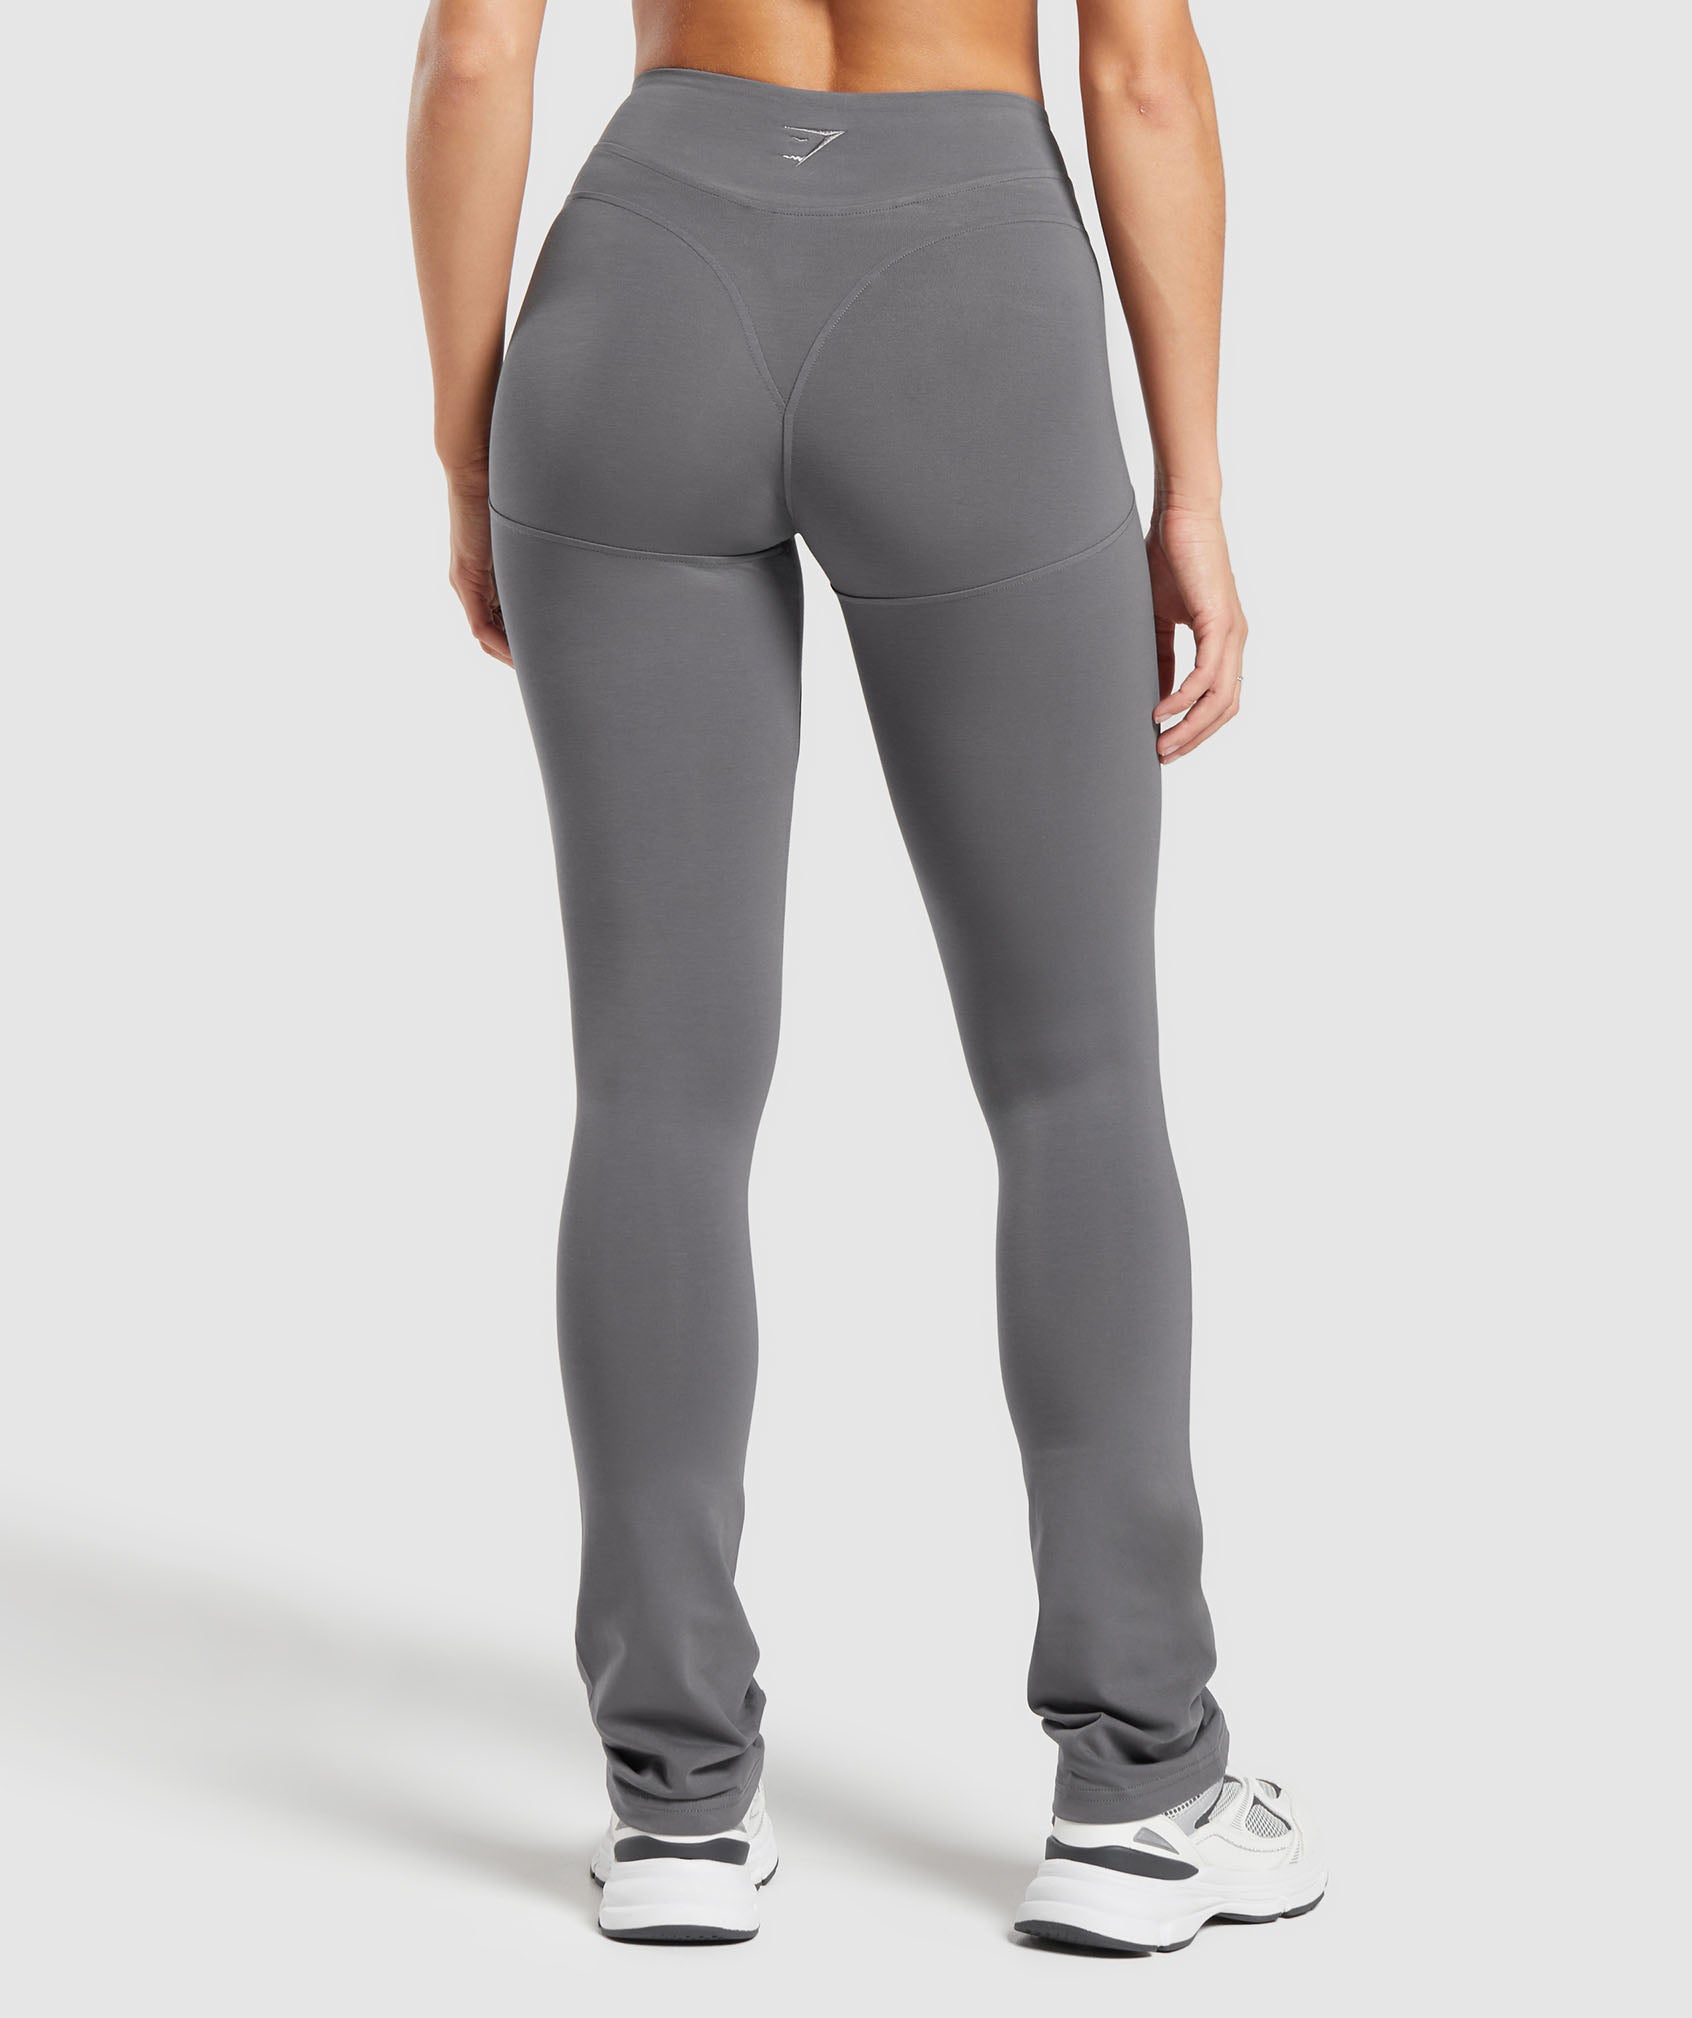 High Waisted Gym Leggings For Women – Father Son & Holy Spirit